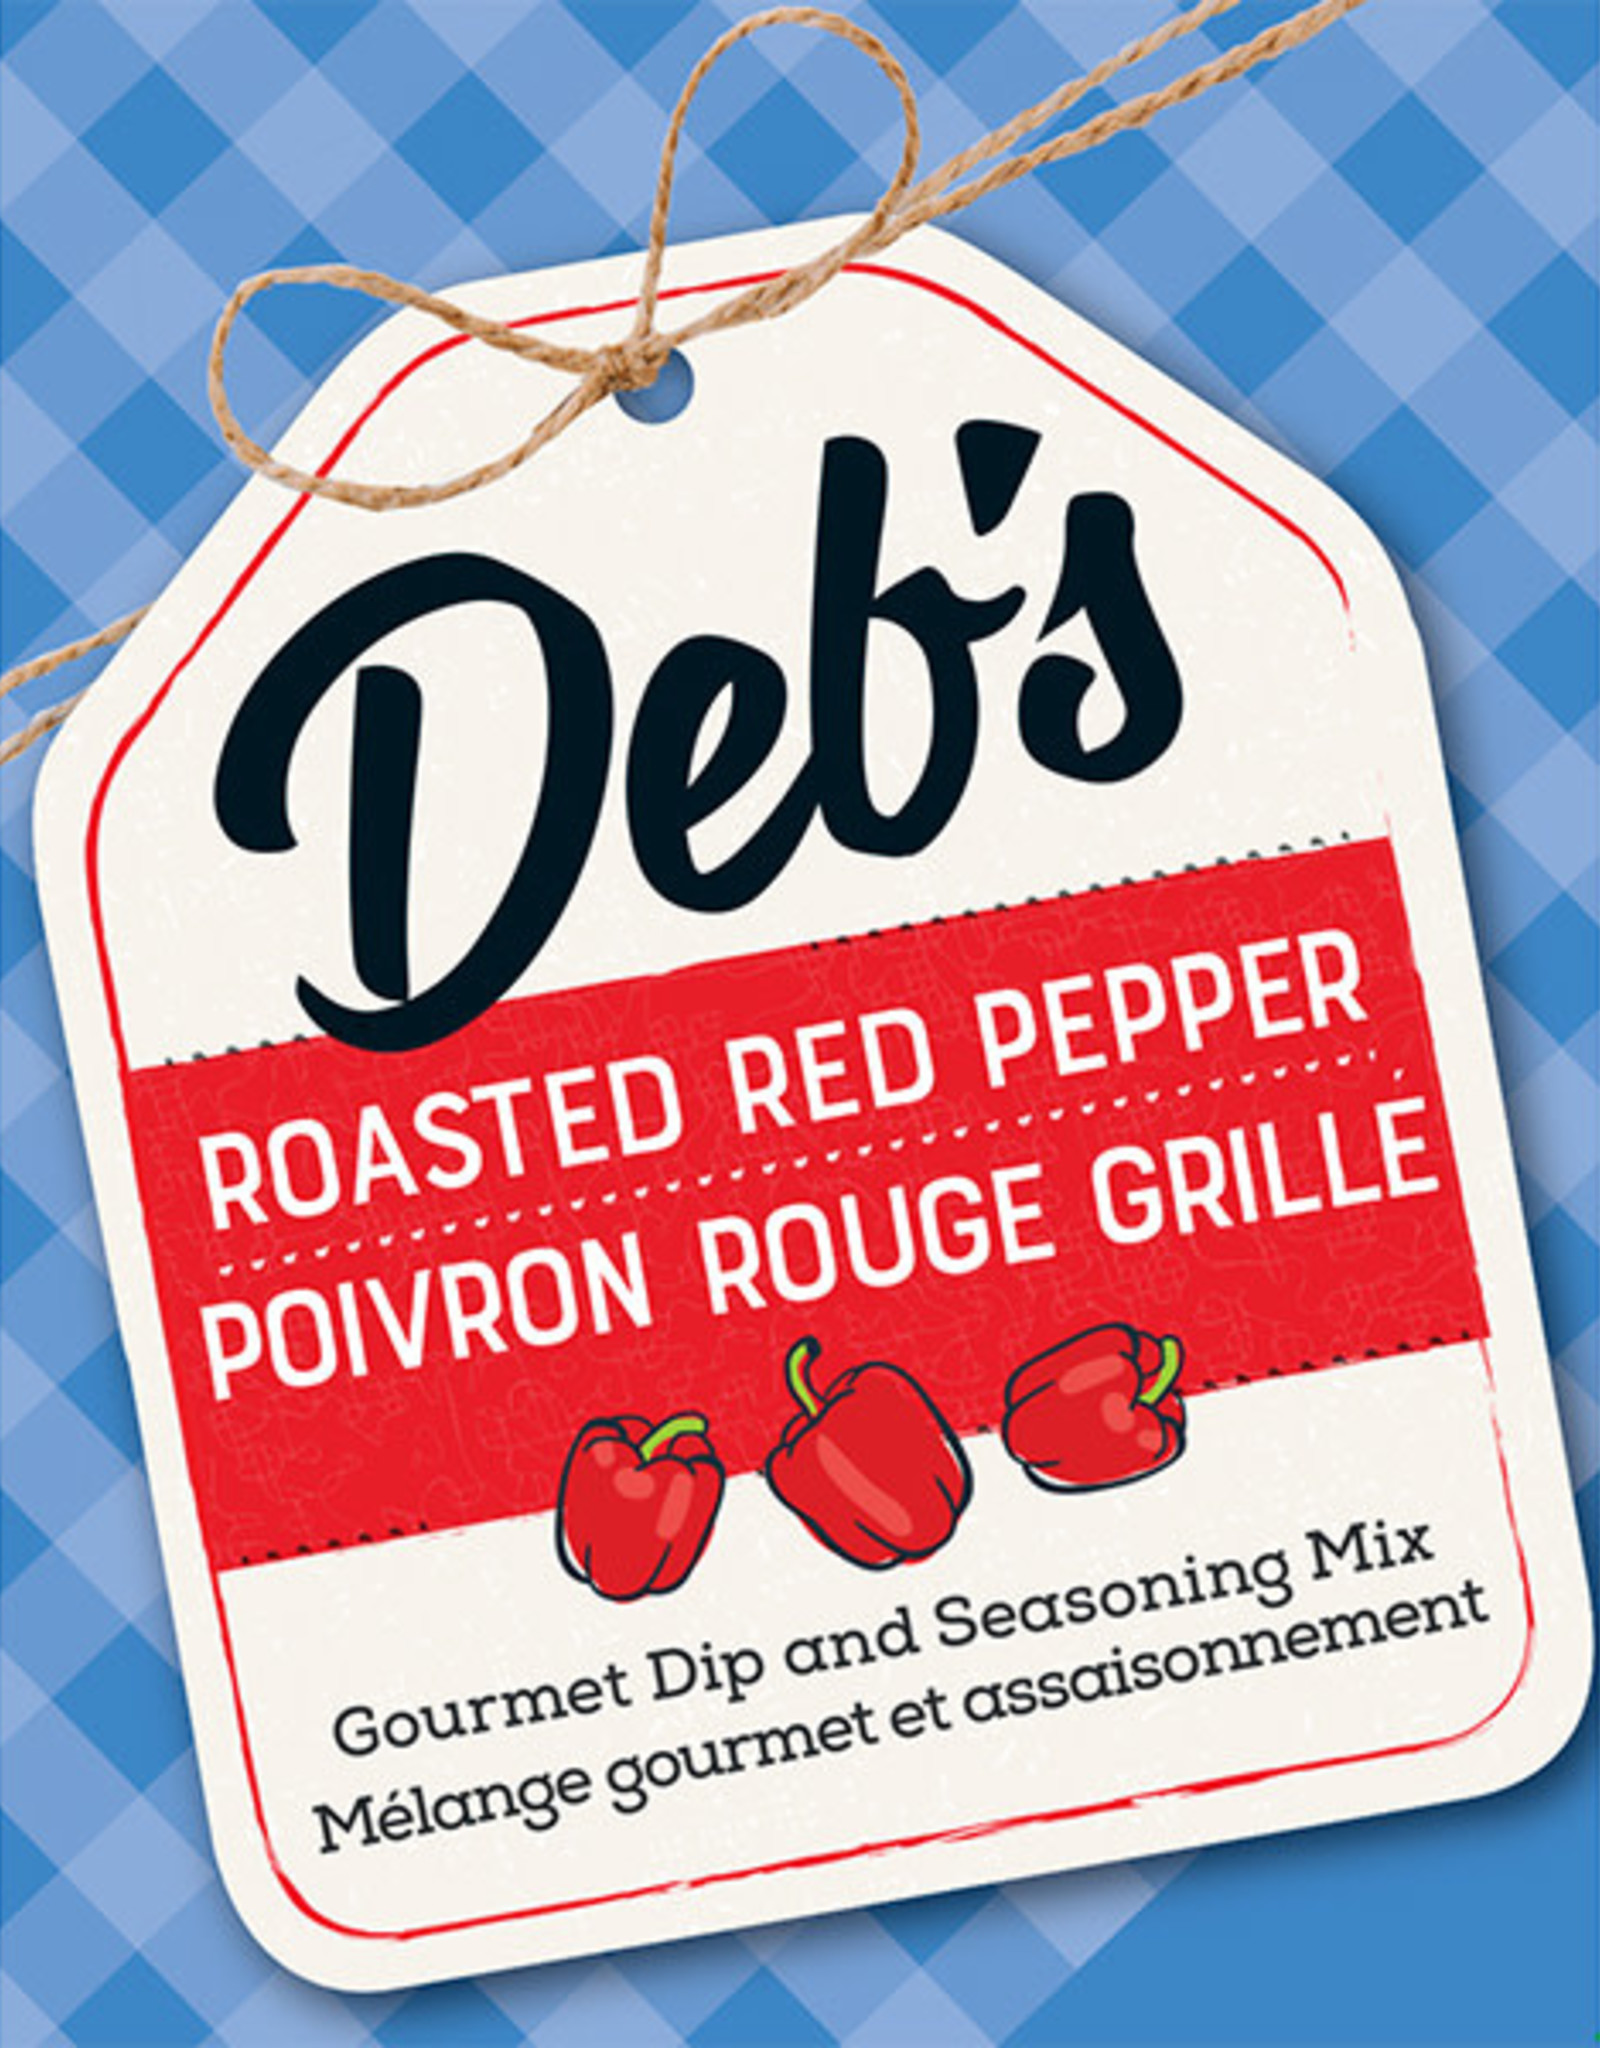 Deb's Dips - Roasted Red Pepper